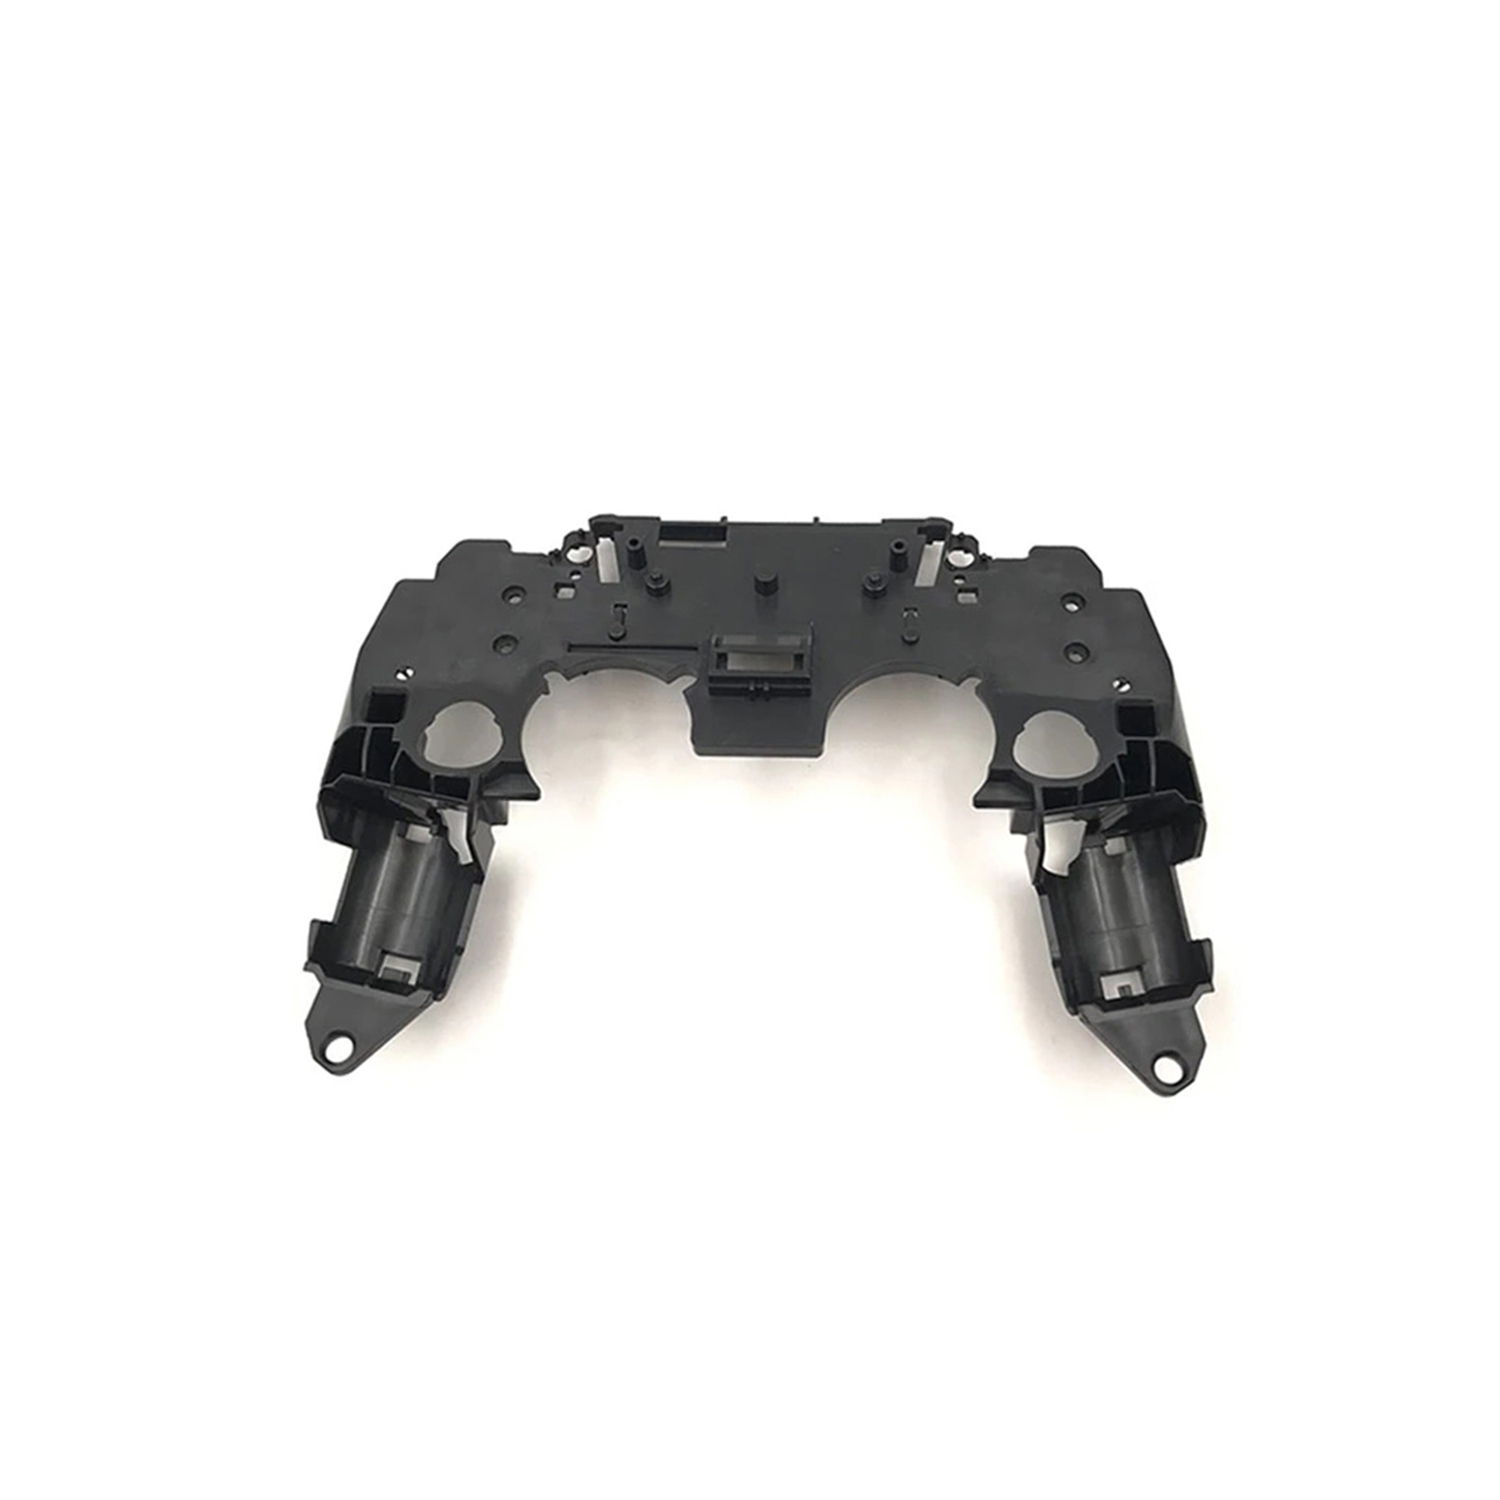 Replacement Inner Support Frame L1 R1 Key Holder For PlayStation 5 (Sony PS5) DualSense Controller